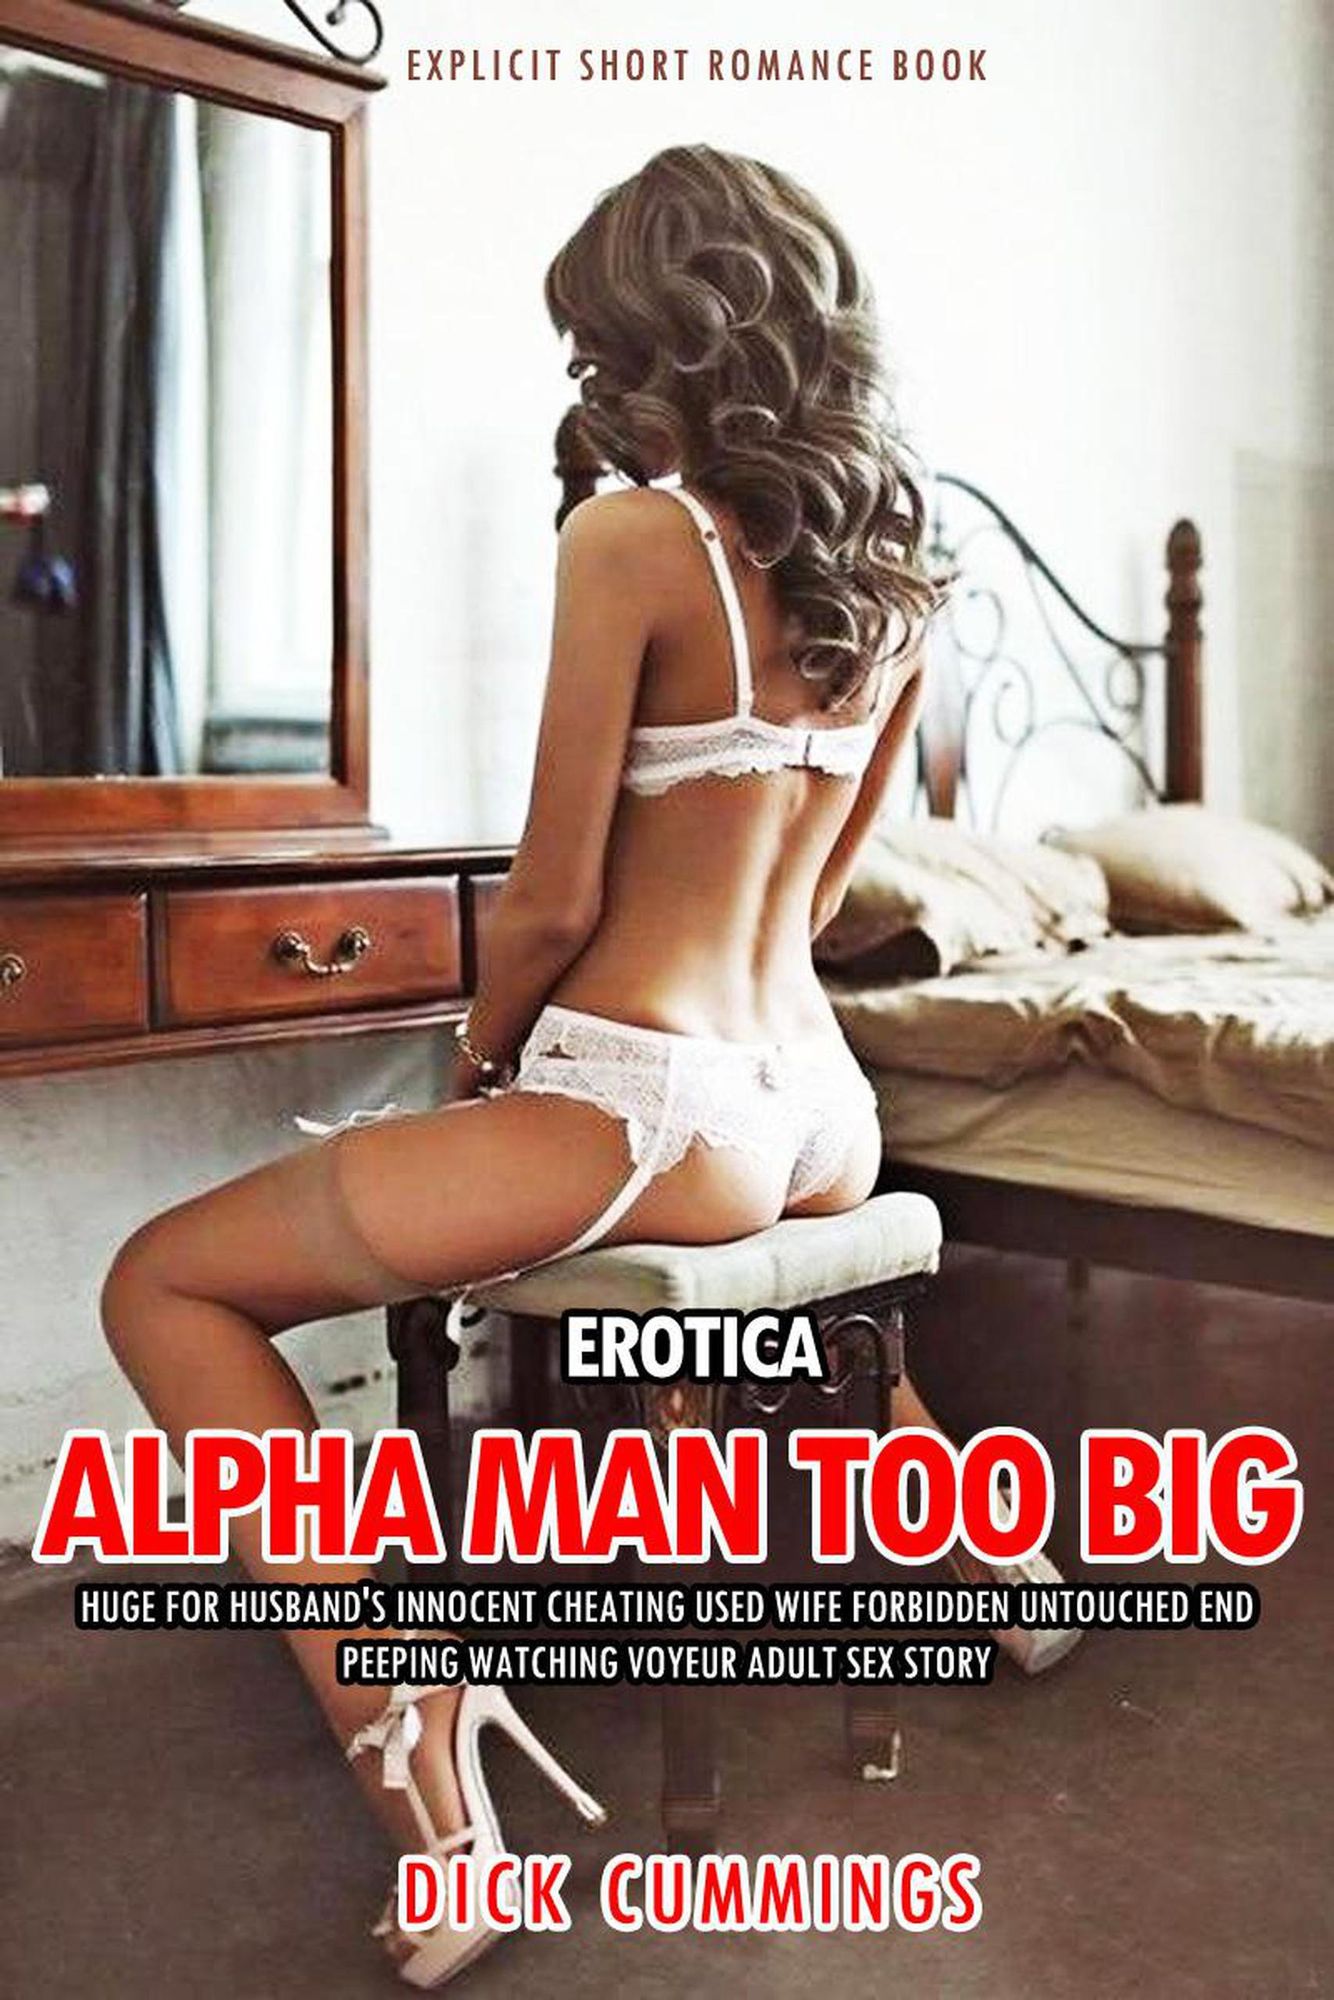 EroticaAlpha Man Too Big Huge For Husbands Innocent Cheating Used Wife Forbidden Untouched End - Peeping Watching Voyeur Adult Sex Story (Explicit S von Dick Cummings photo